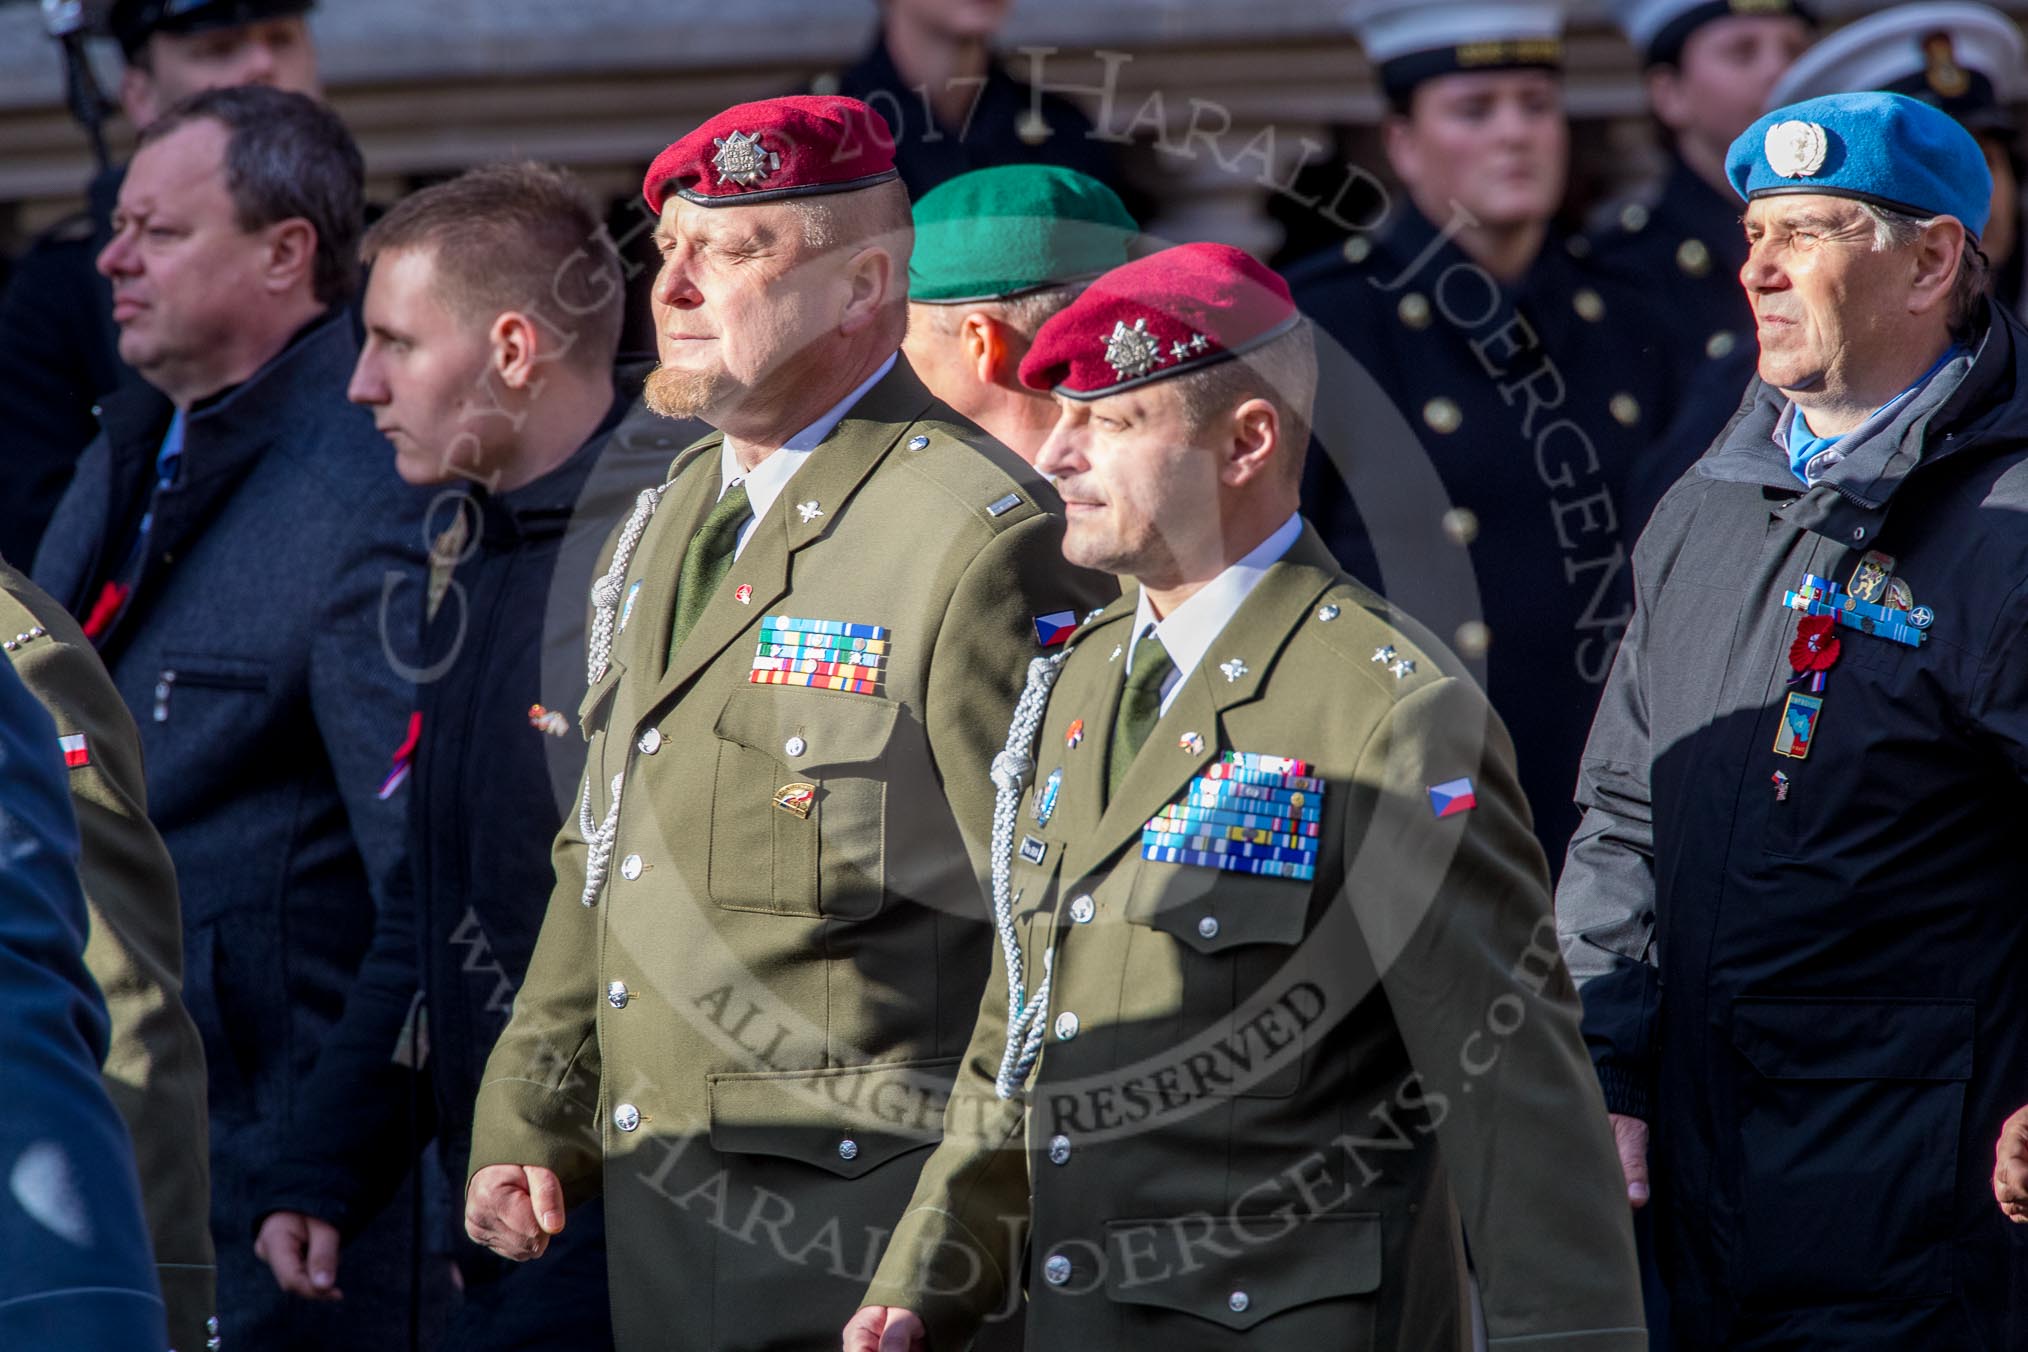 Czechoslovak Legionary (Group D18, 30 members) during the Royal British Legion March Past on Remembrance Sunday at the Cenotaph, Whitehall, Westminster, London, 11 November 2018, 12:23.